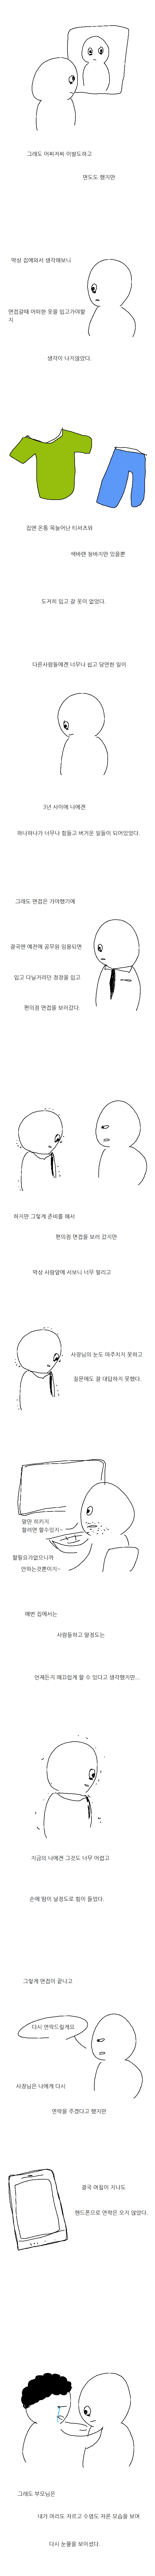 24post.co.kr_005.png